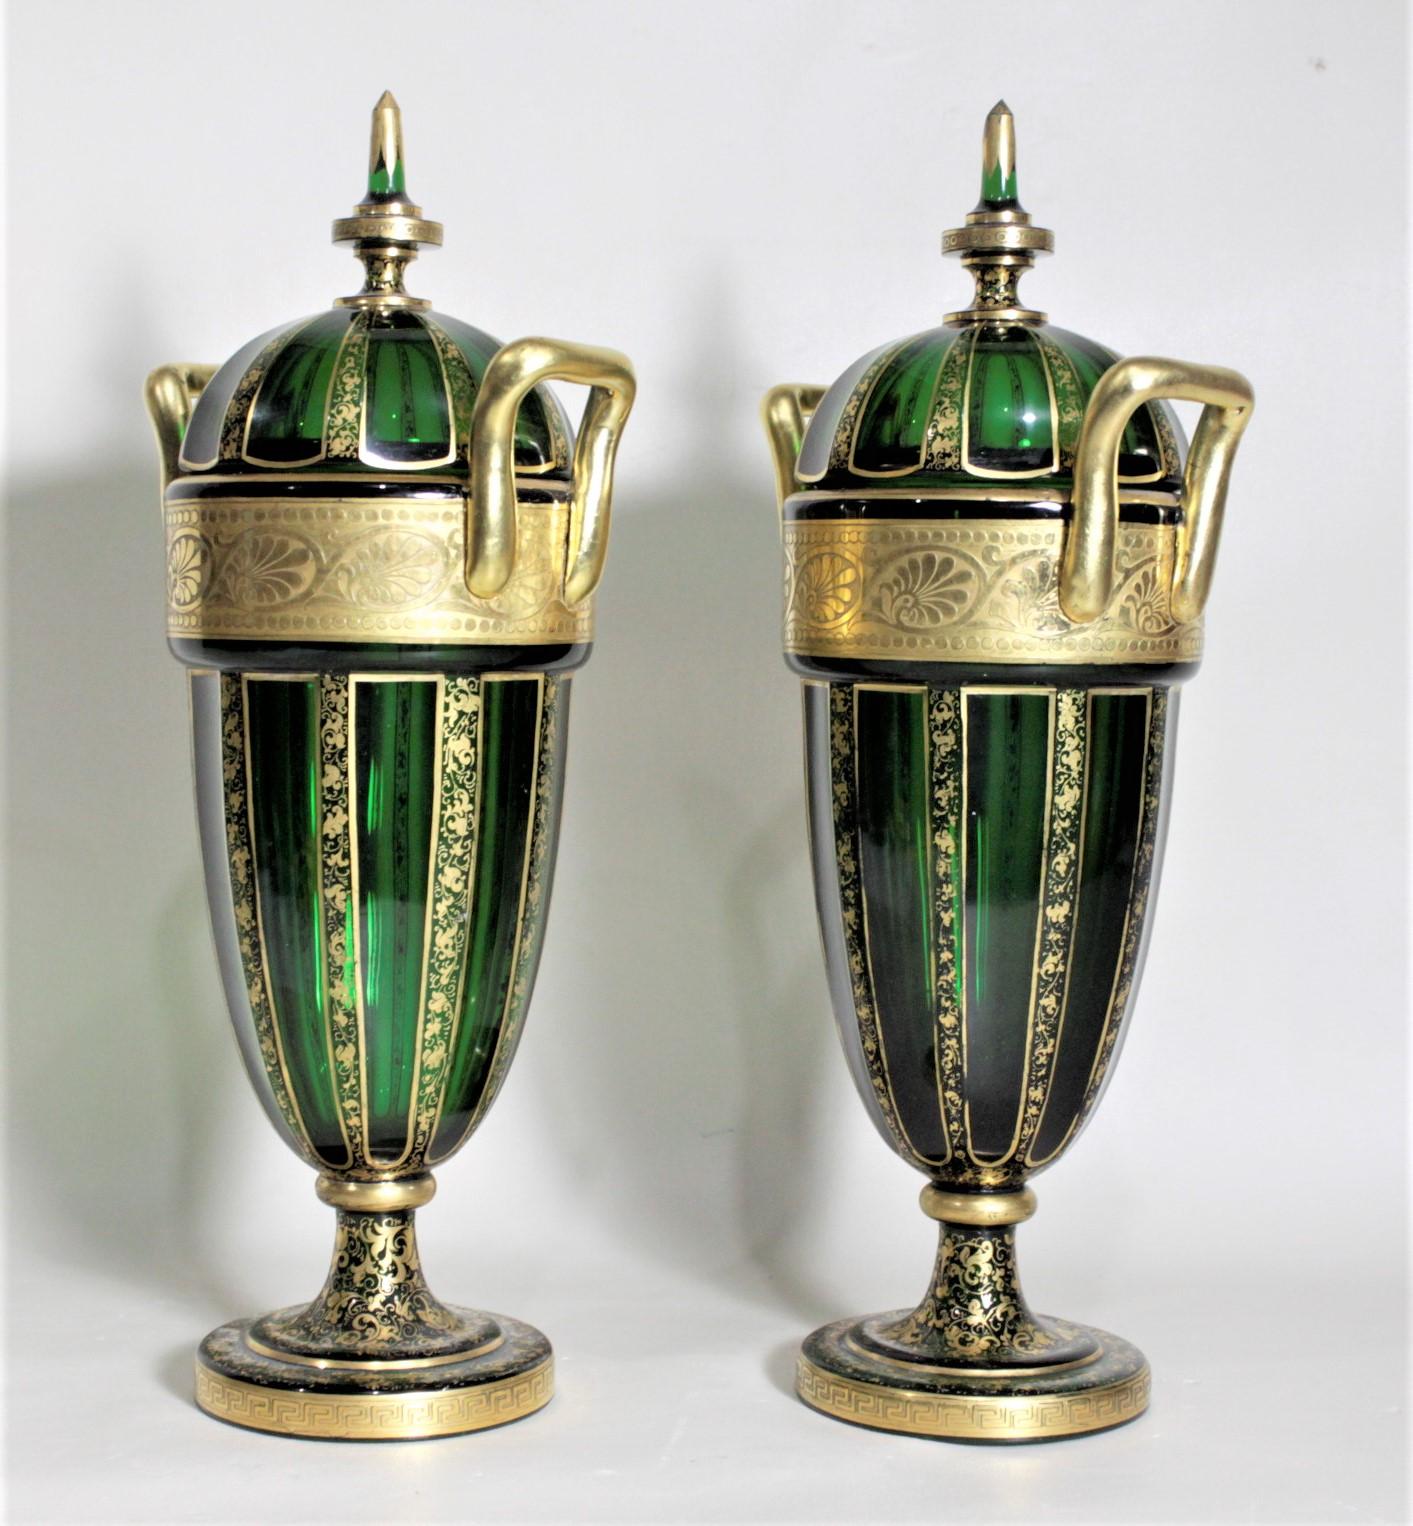 Pair of Antique Green Bohemian Covered Glass Urns with Heavy Gilt Decoration For Sale 1